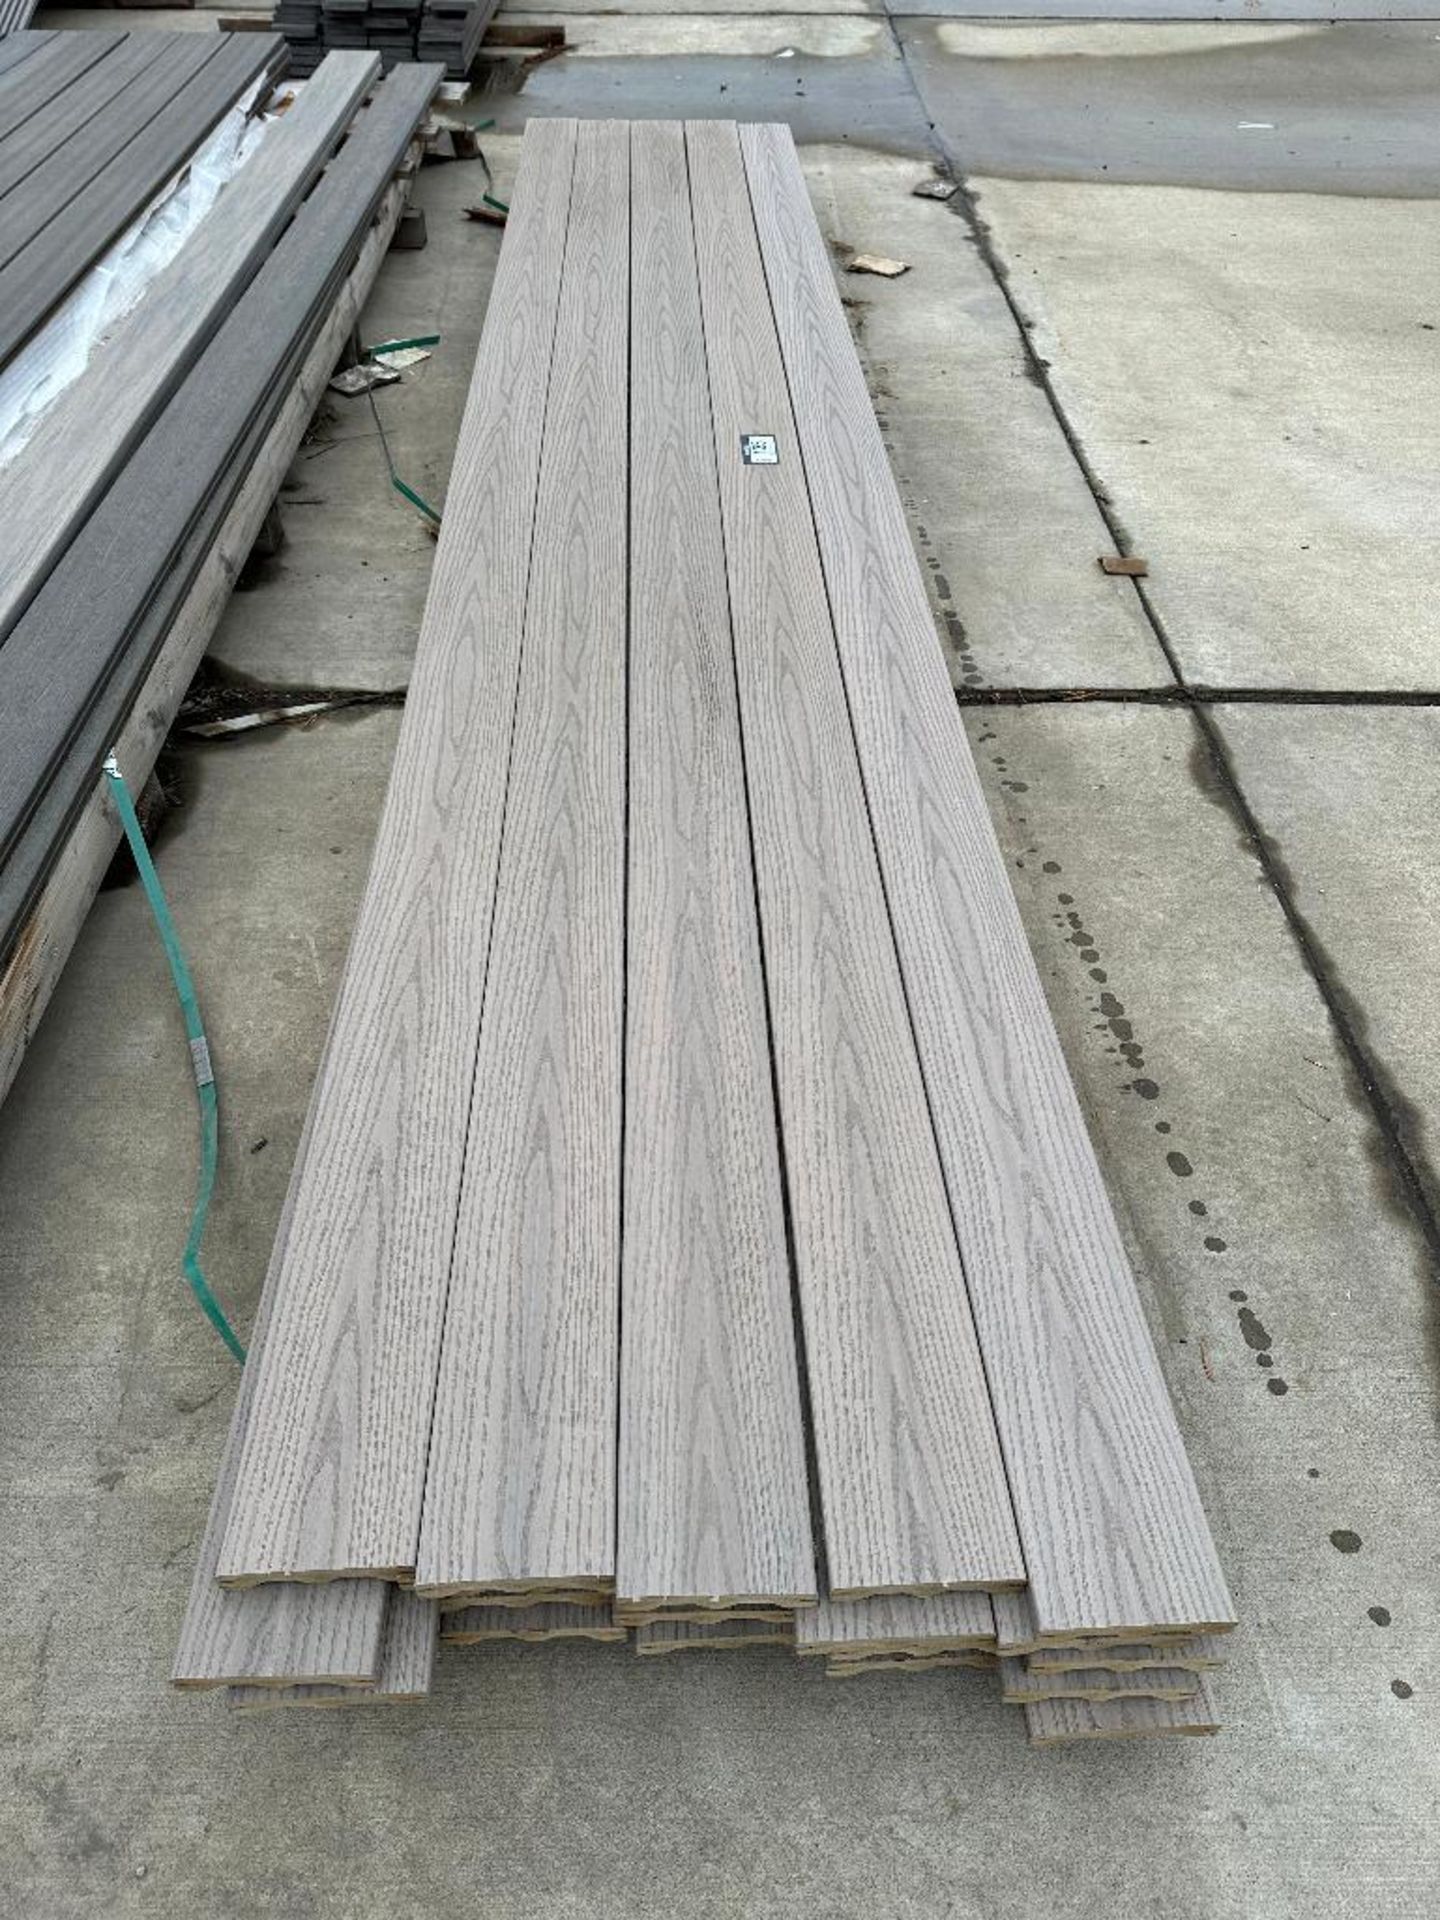 Lot of Approx. (25) Asst. 12' Composite Deck Boards - Image 2 of 3